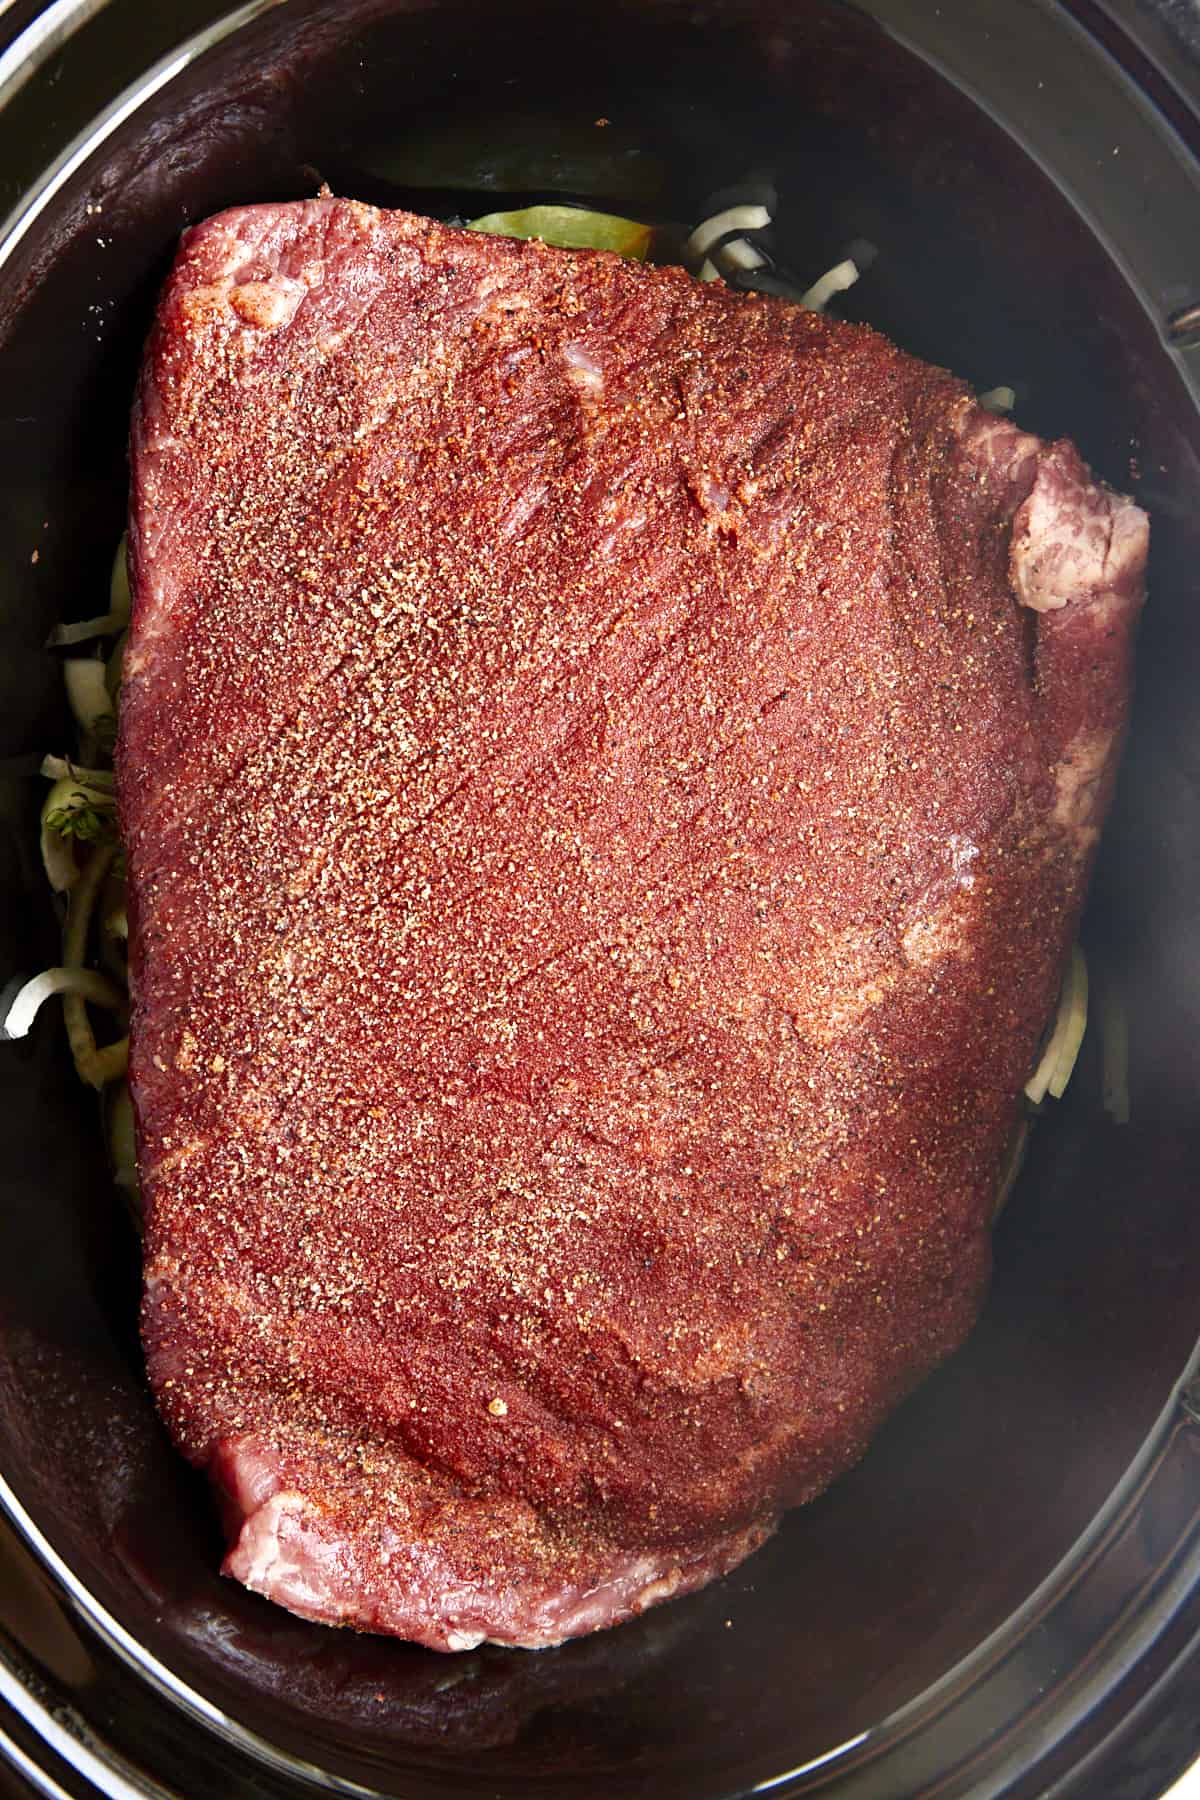 A 3-pound raw, seasoned beef brisket in a slow cooker with onions and herbs. 